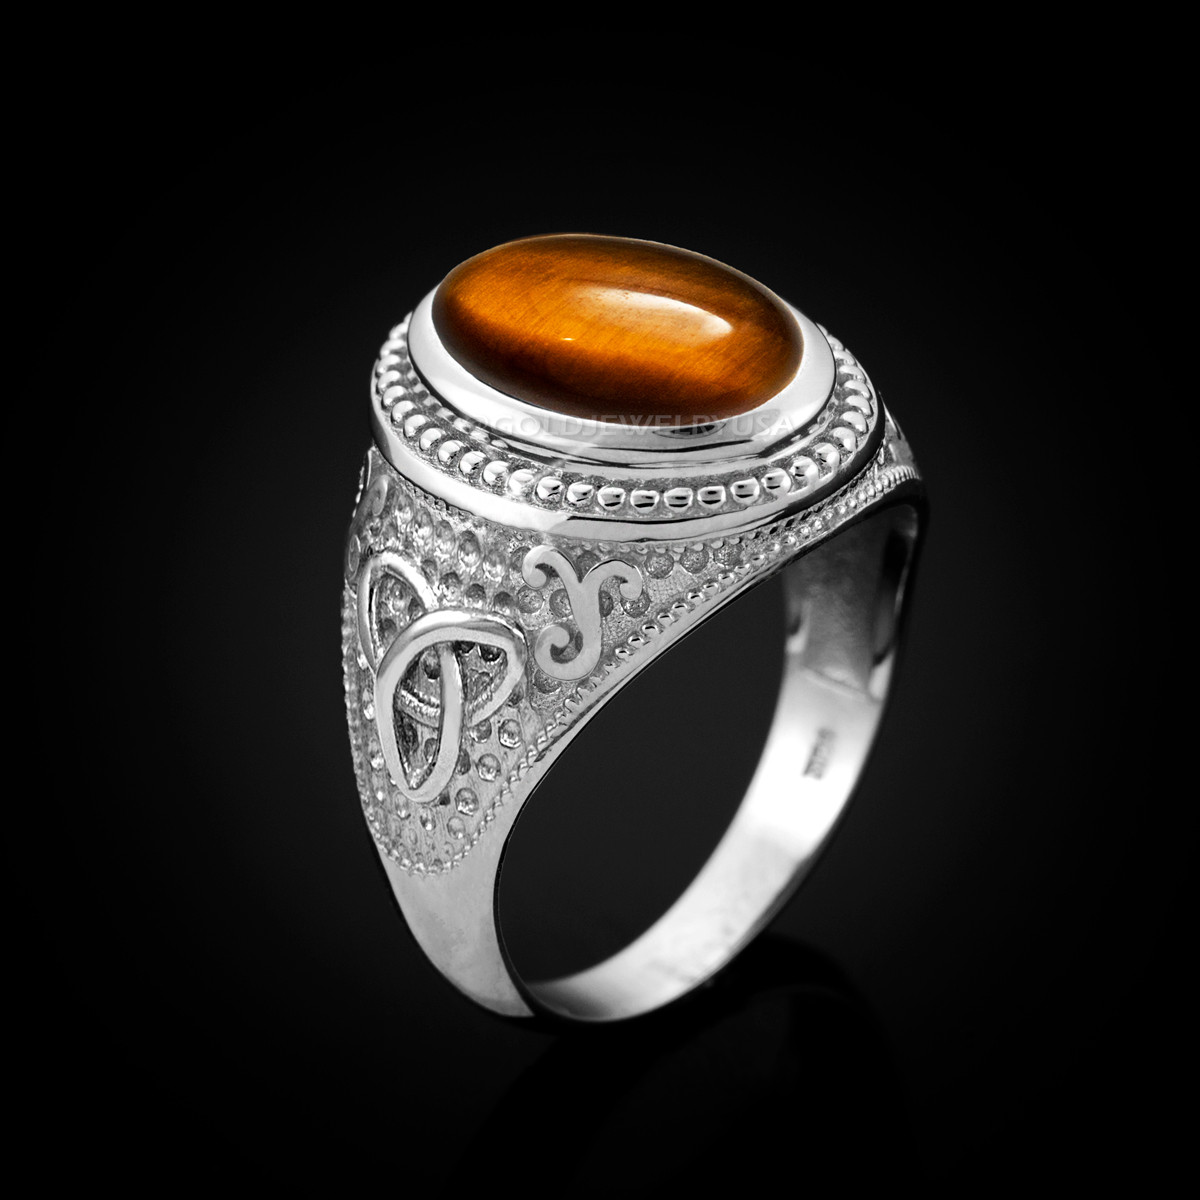 Amazon.com: Tiger's eye Stone Ring, Solid 925 Sterling Silver Ring, NATURAL Tiger's  eye Gemstone, HANDMADE Silver Ring, Gift for Her/Him, Kohi Ring, UNISEX Ring,  KOHI Ring - KCR014 (8.25) : Handmade Products